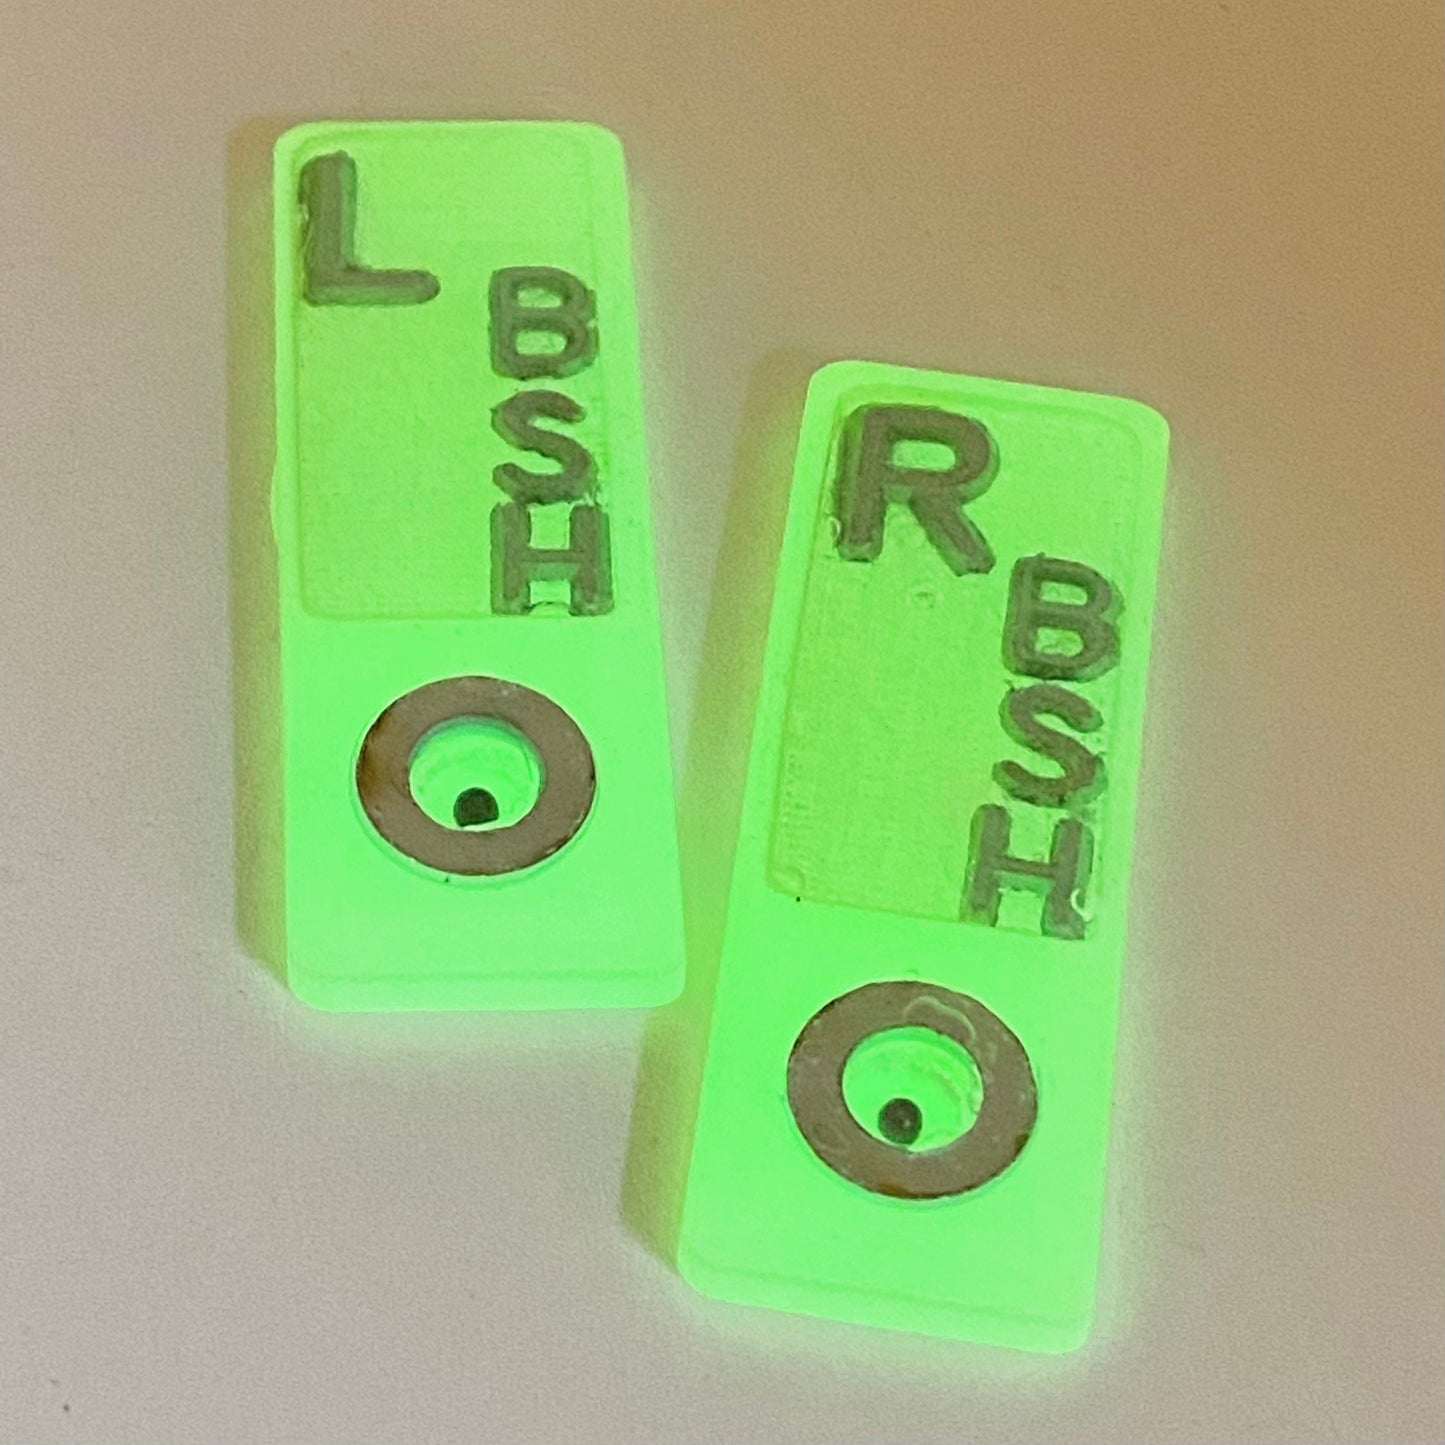 GLOW BB Position Bead Xray Markers Customized with 2-3 initials